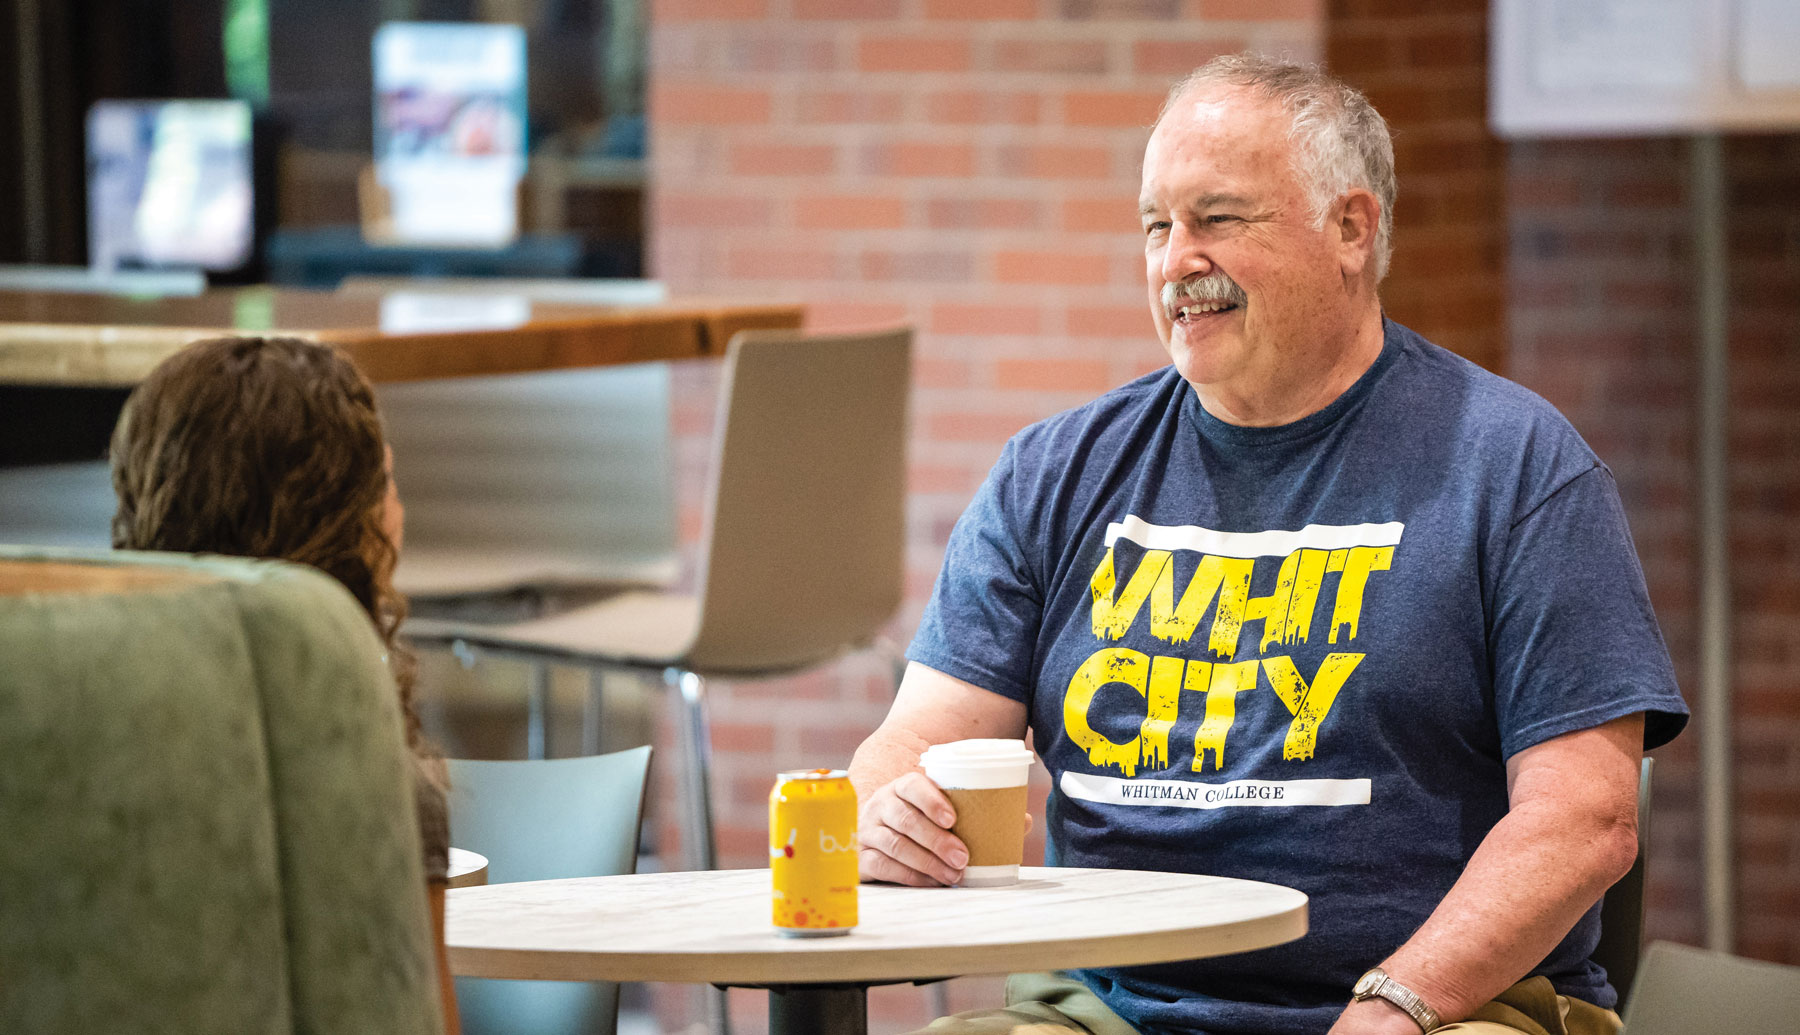 Whitman College mentor Jim Dow speaks with a student